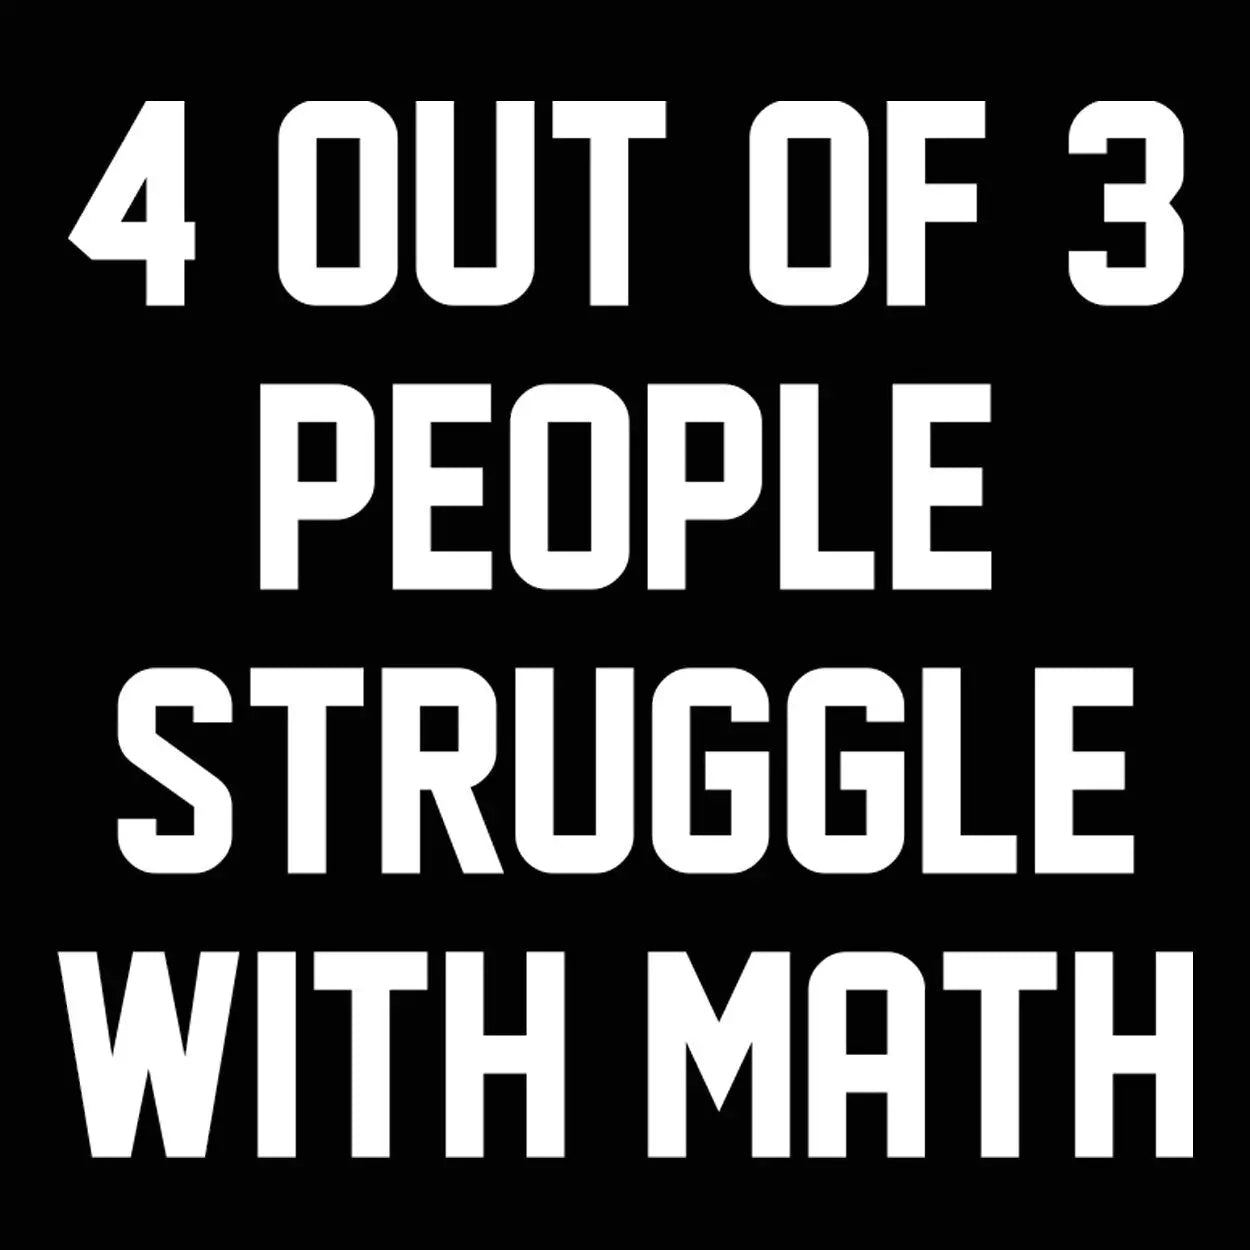 4 Out Of 3 People Struggle With Math Tshirt - Donkey Tees